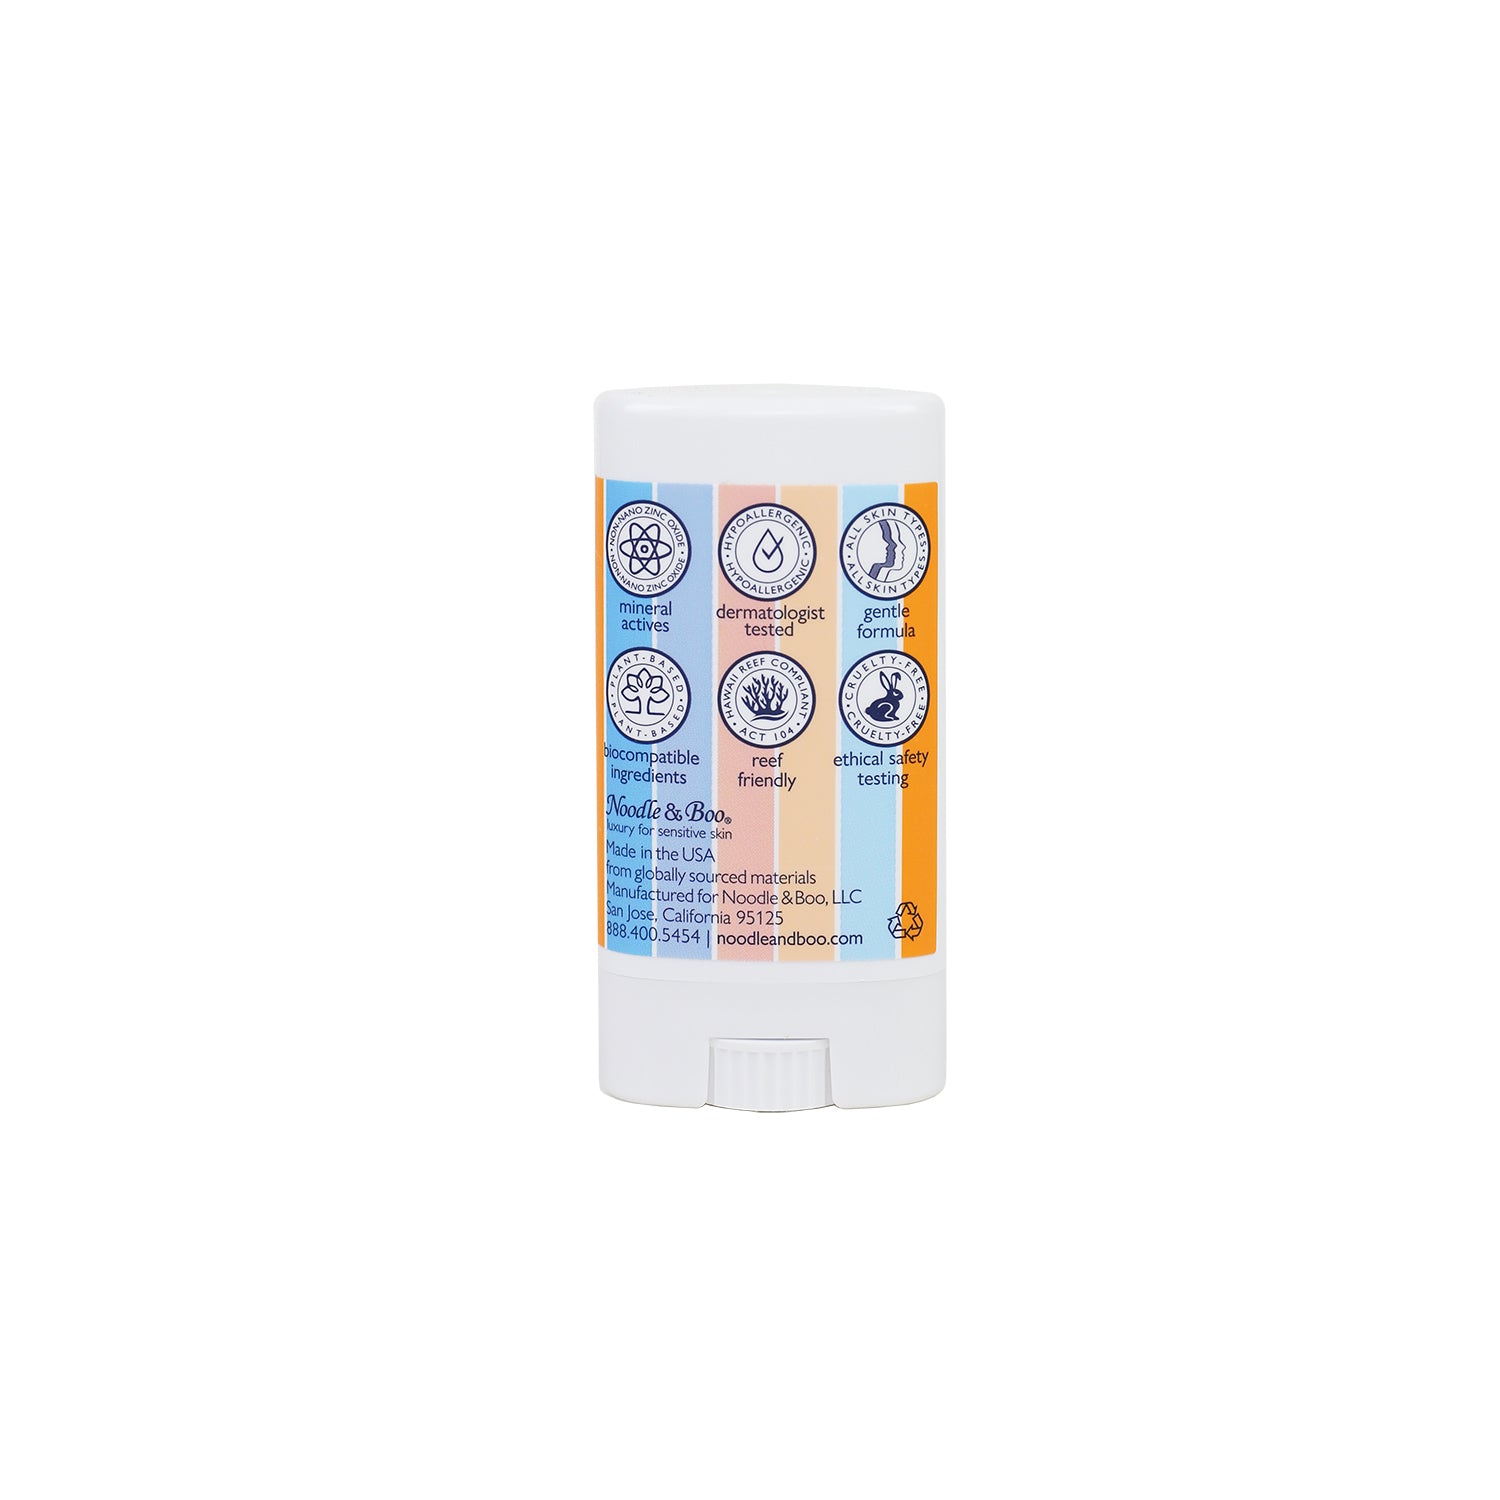 Back side of the Ultra Sheer Mineral Sunscreen Stick SPF 30 